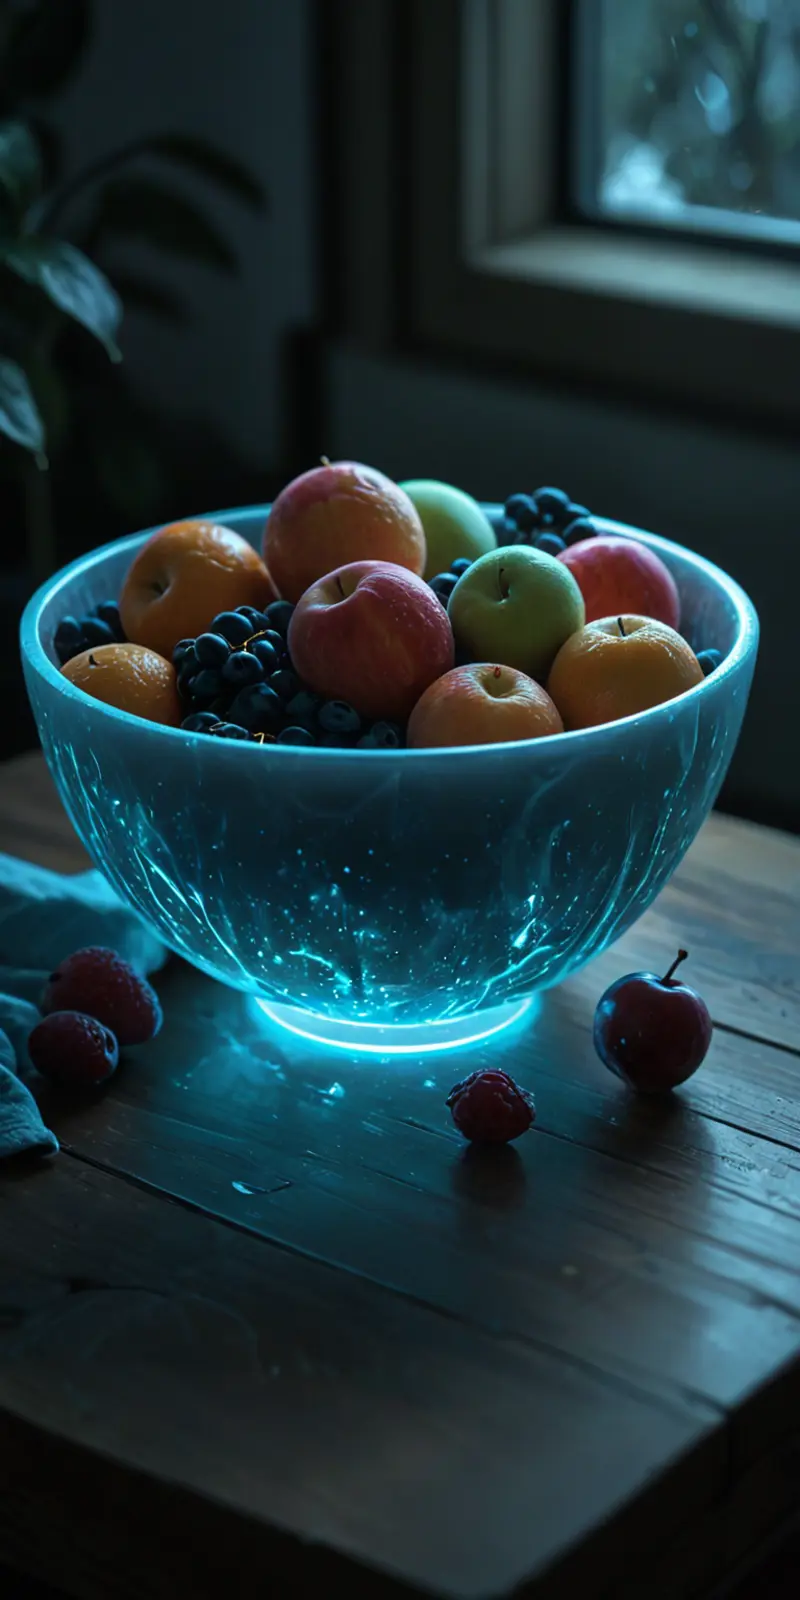 A bowl filled with various fruits on a wooden surface, emitting a soft blue glow that illuminates the fruits from below. The natural light from the window contrasts with the artificial luminescence of the bowl, highlighting the freshness and vibrant colors of the fruit. 